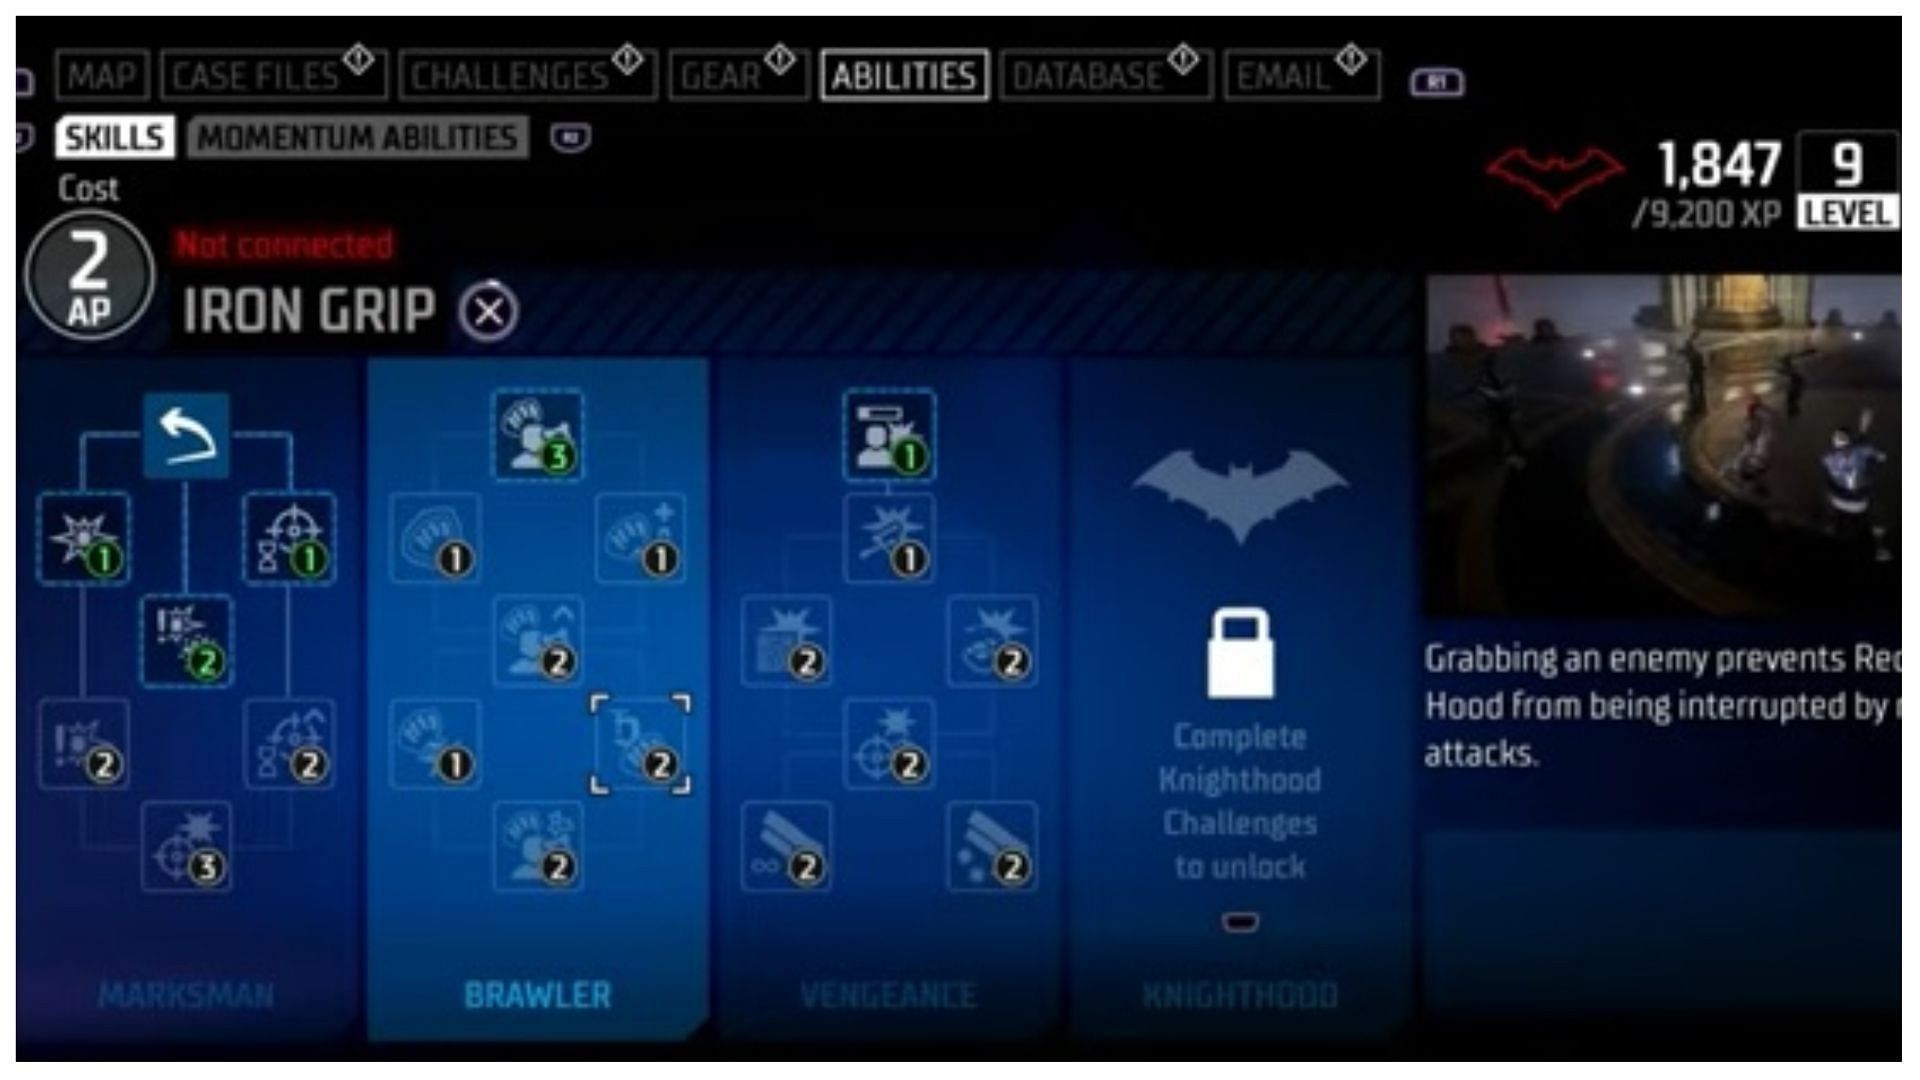 Iron Grip will prevent Red Hood from being interrupted by enemy attacks. (image via YouTube/TonyBingGaming)